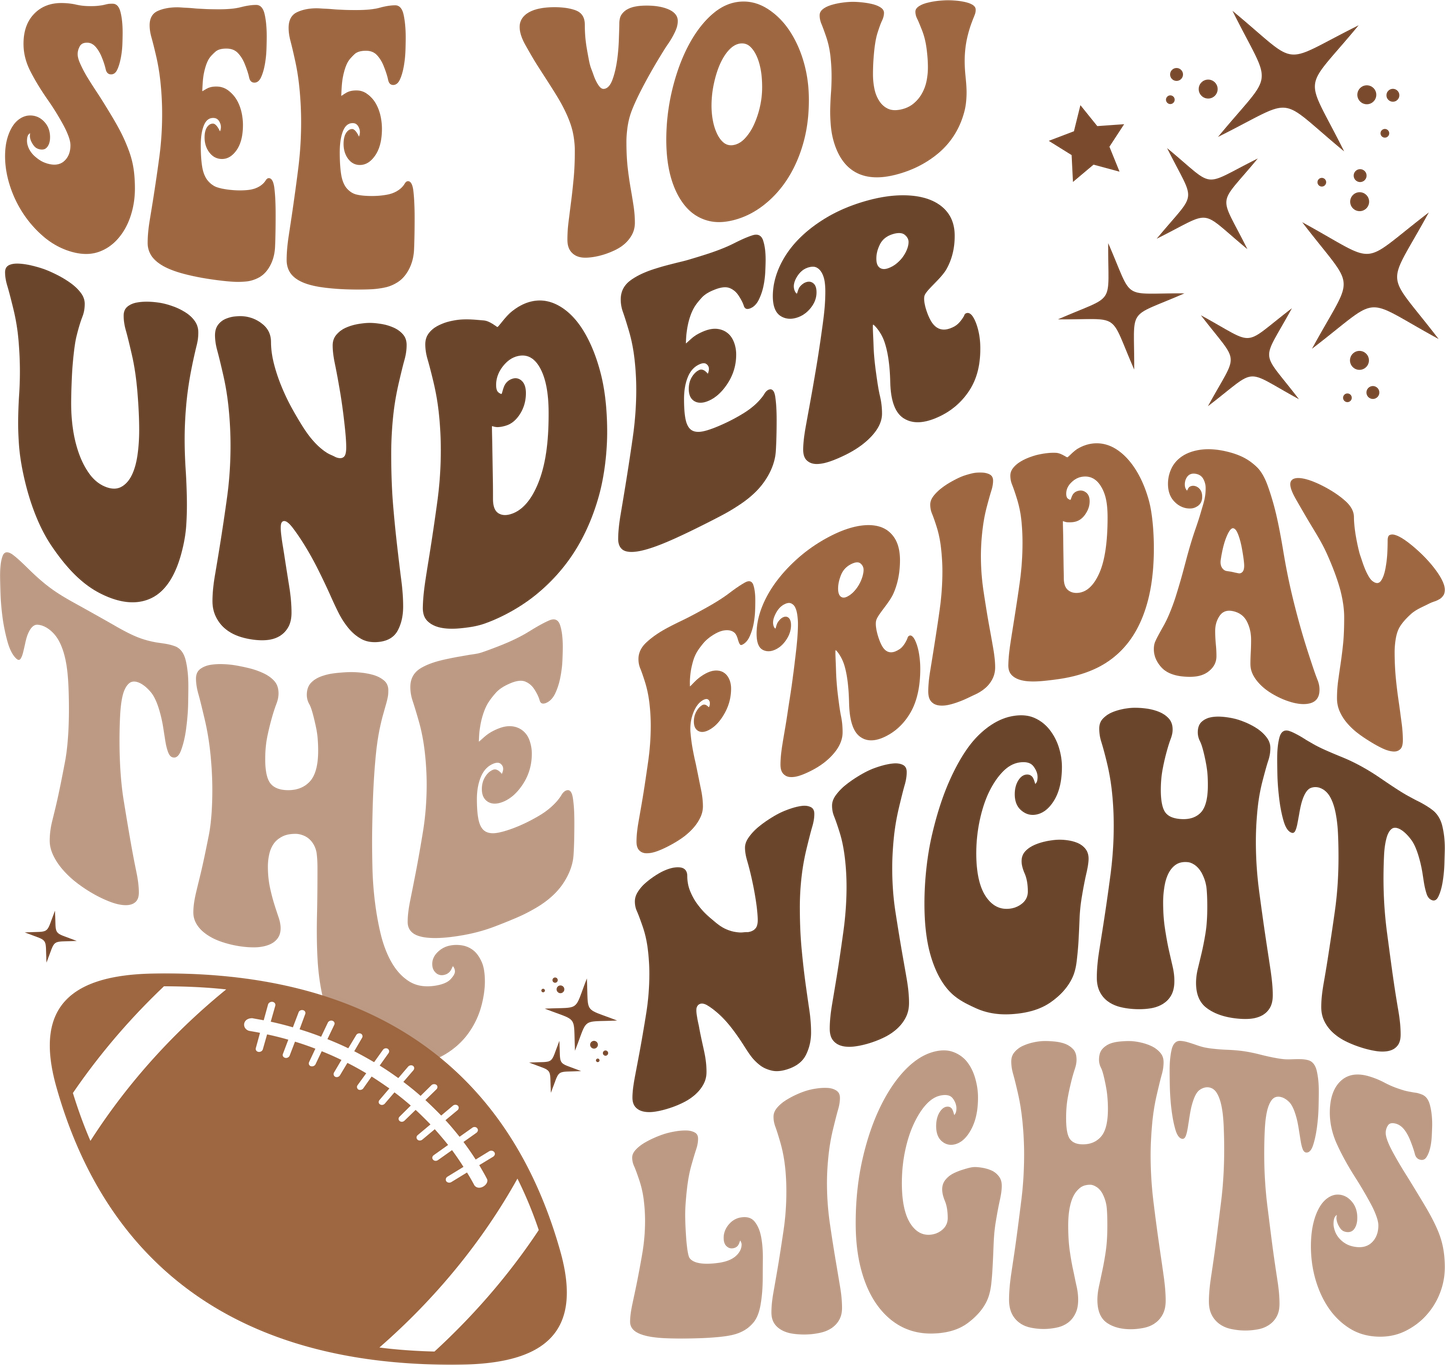 See You Under…Lights